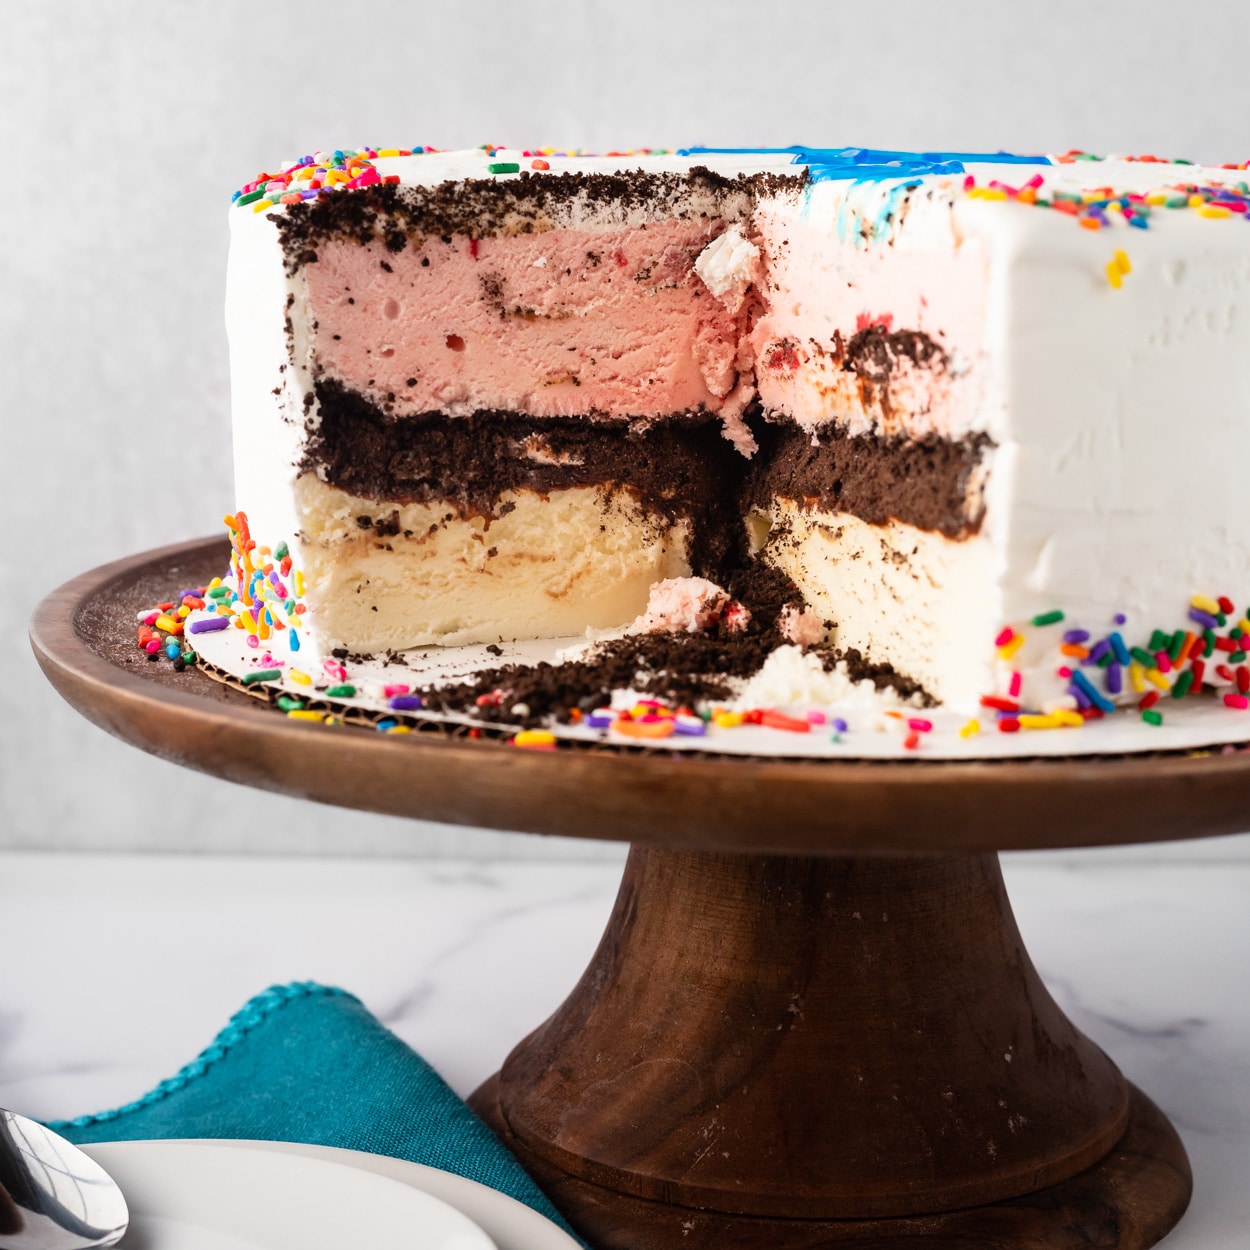 How To Make Your Own DIY Ice Cream Cake